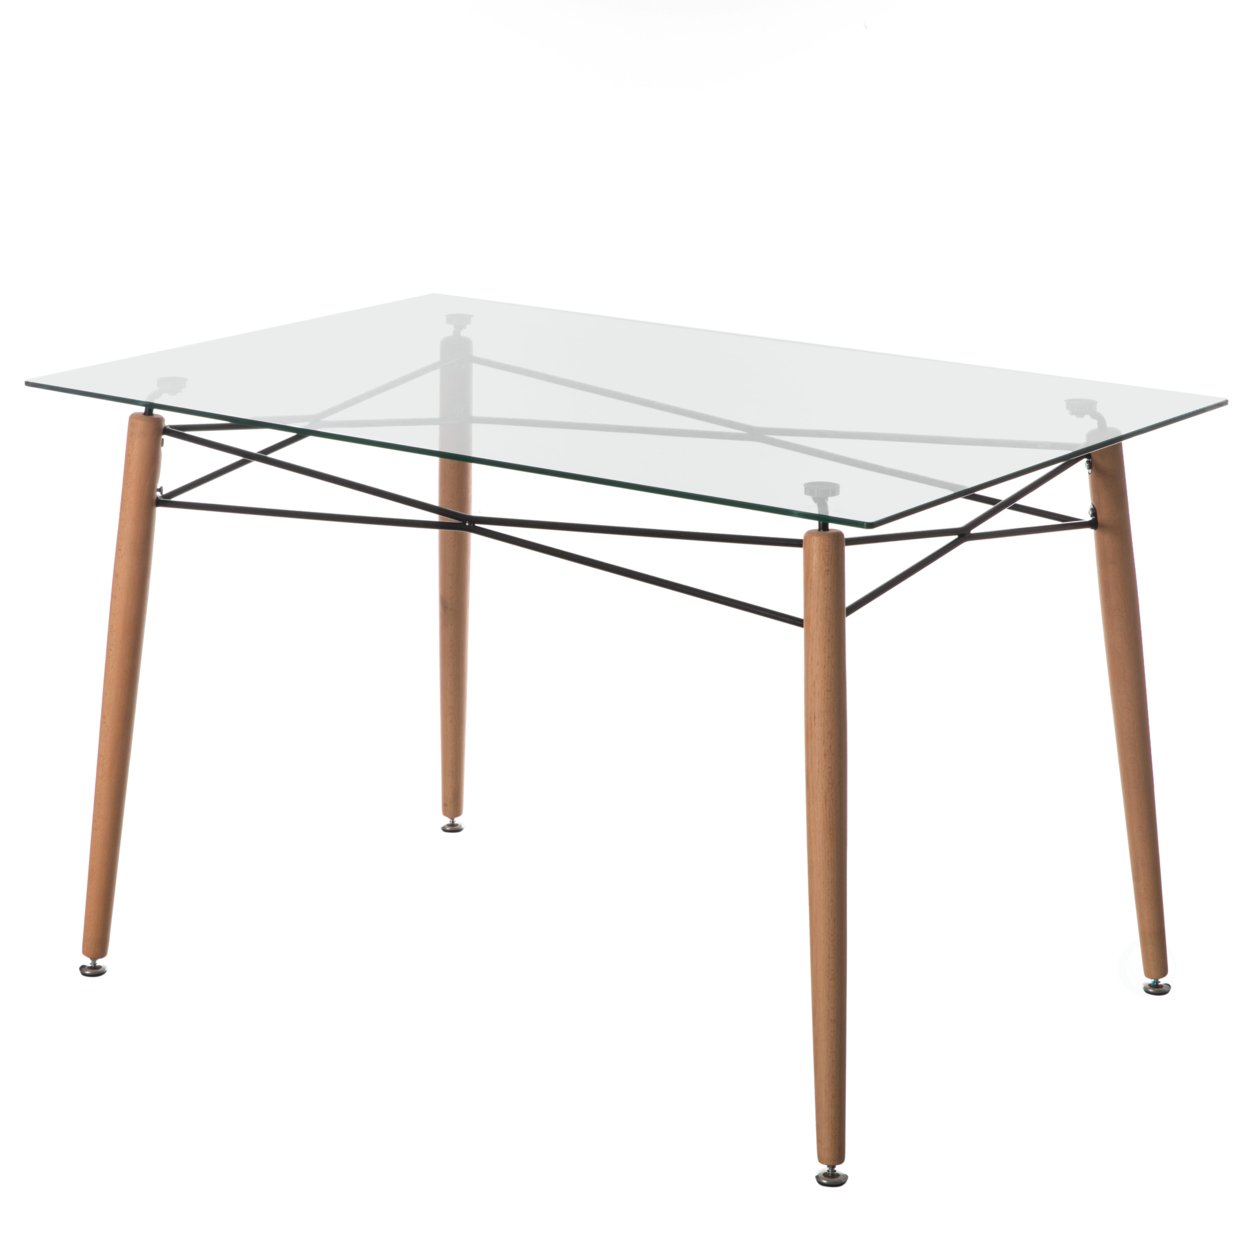 Fabulaxe Rectangle Clear Glass Top Accent Dining Table with 4 Beech Metal Frame Solid Wood Legs Modern Space Saving Small Leisure